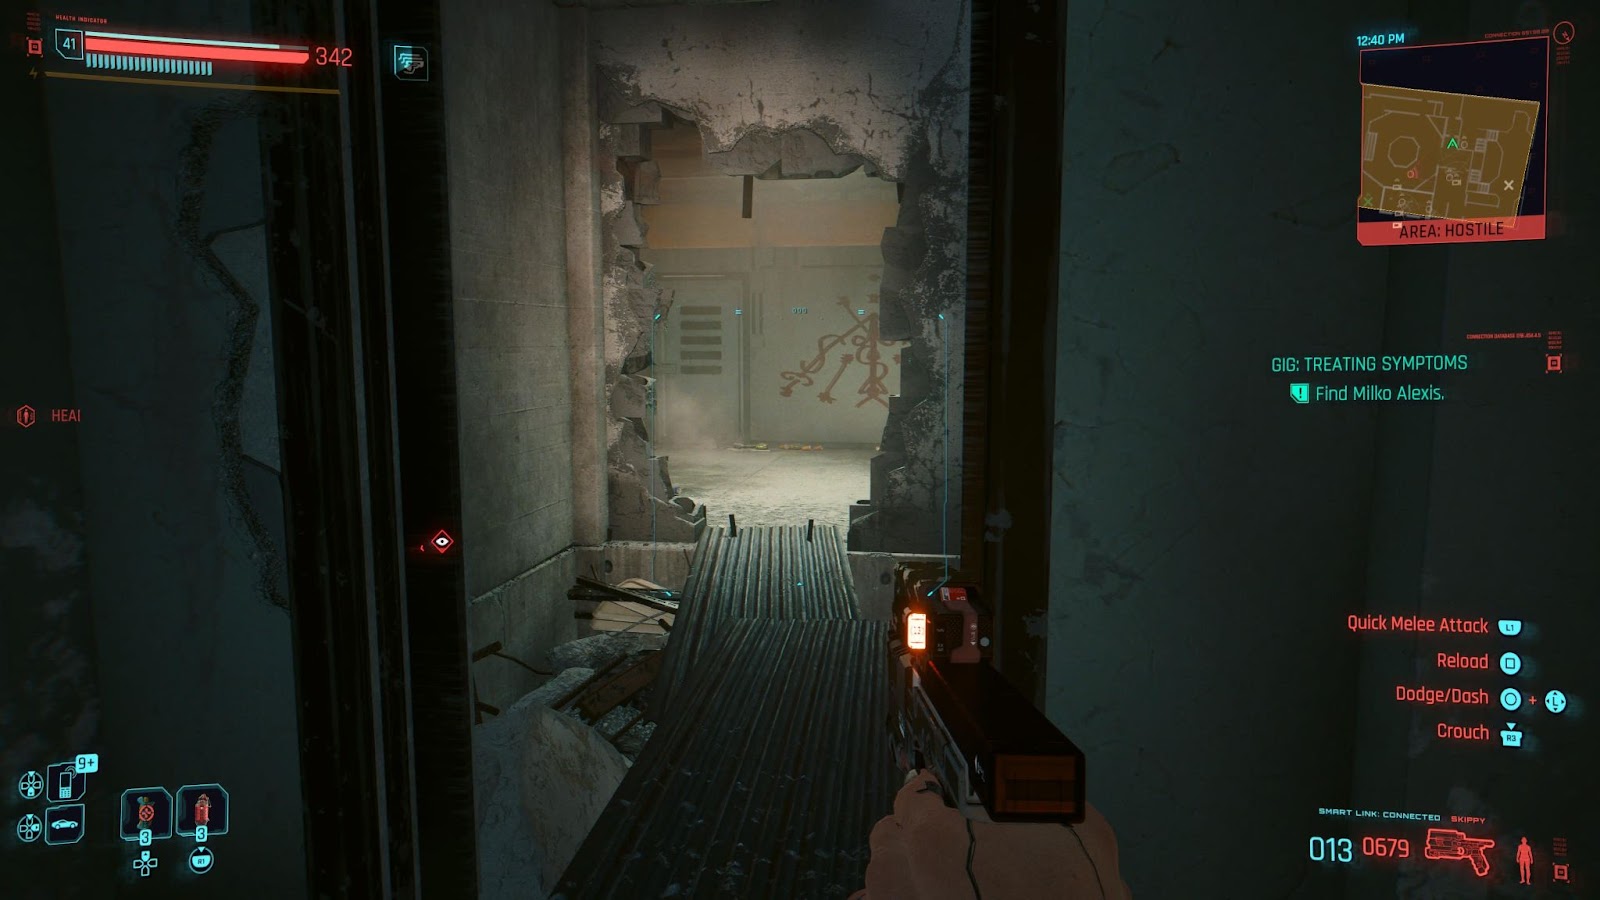 An in game screenshot of the Voodoo Boys base from the game Cyberpunk 2077. 